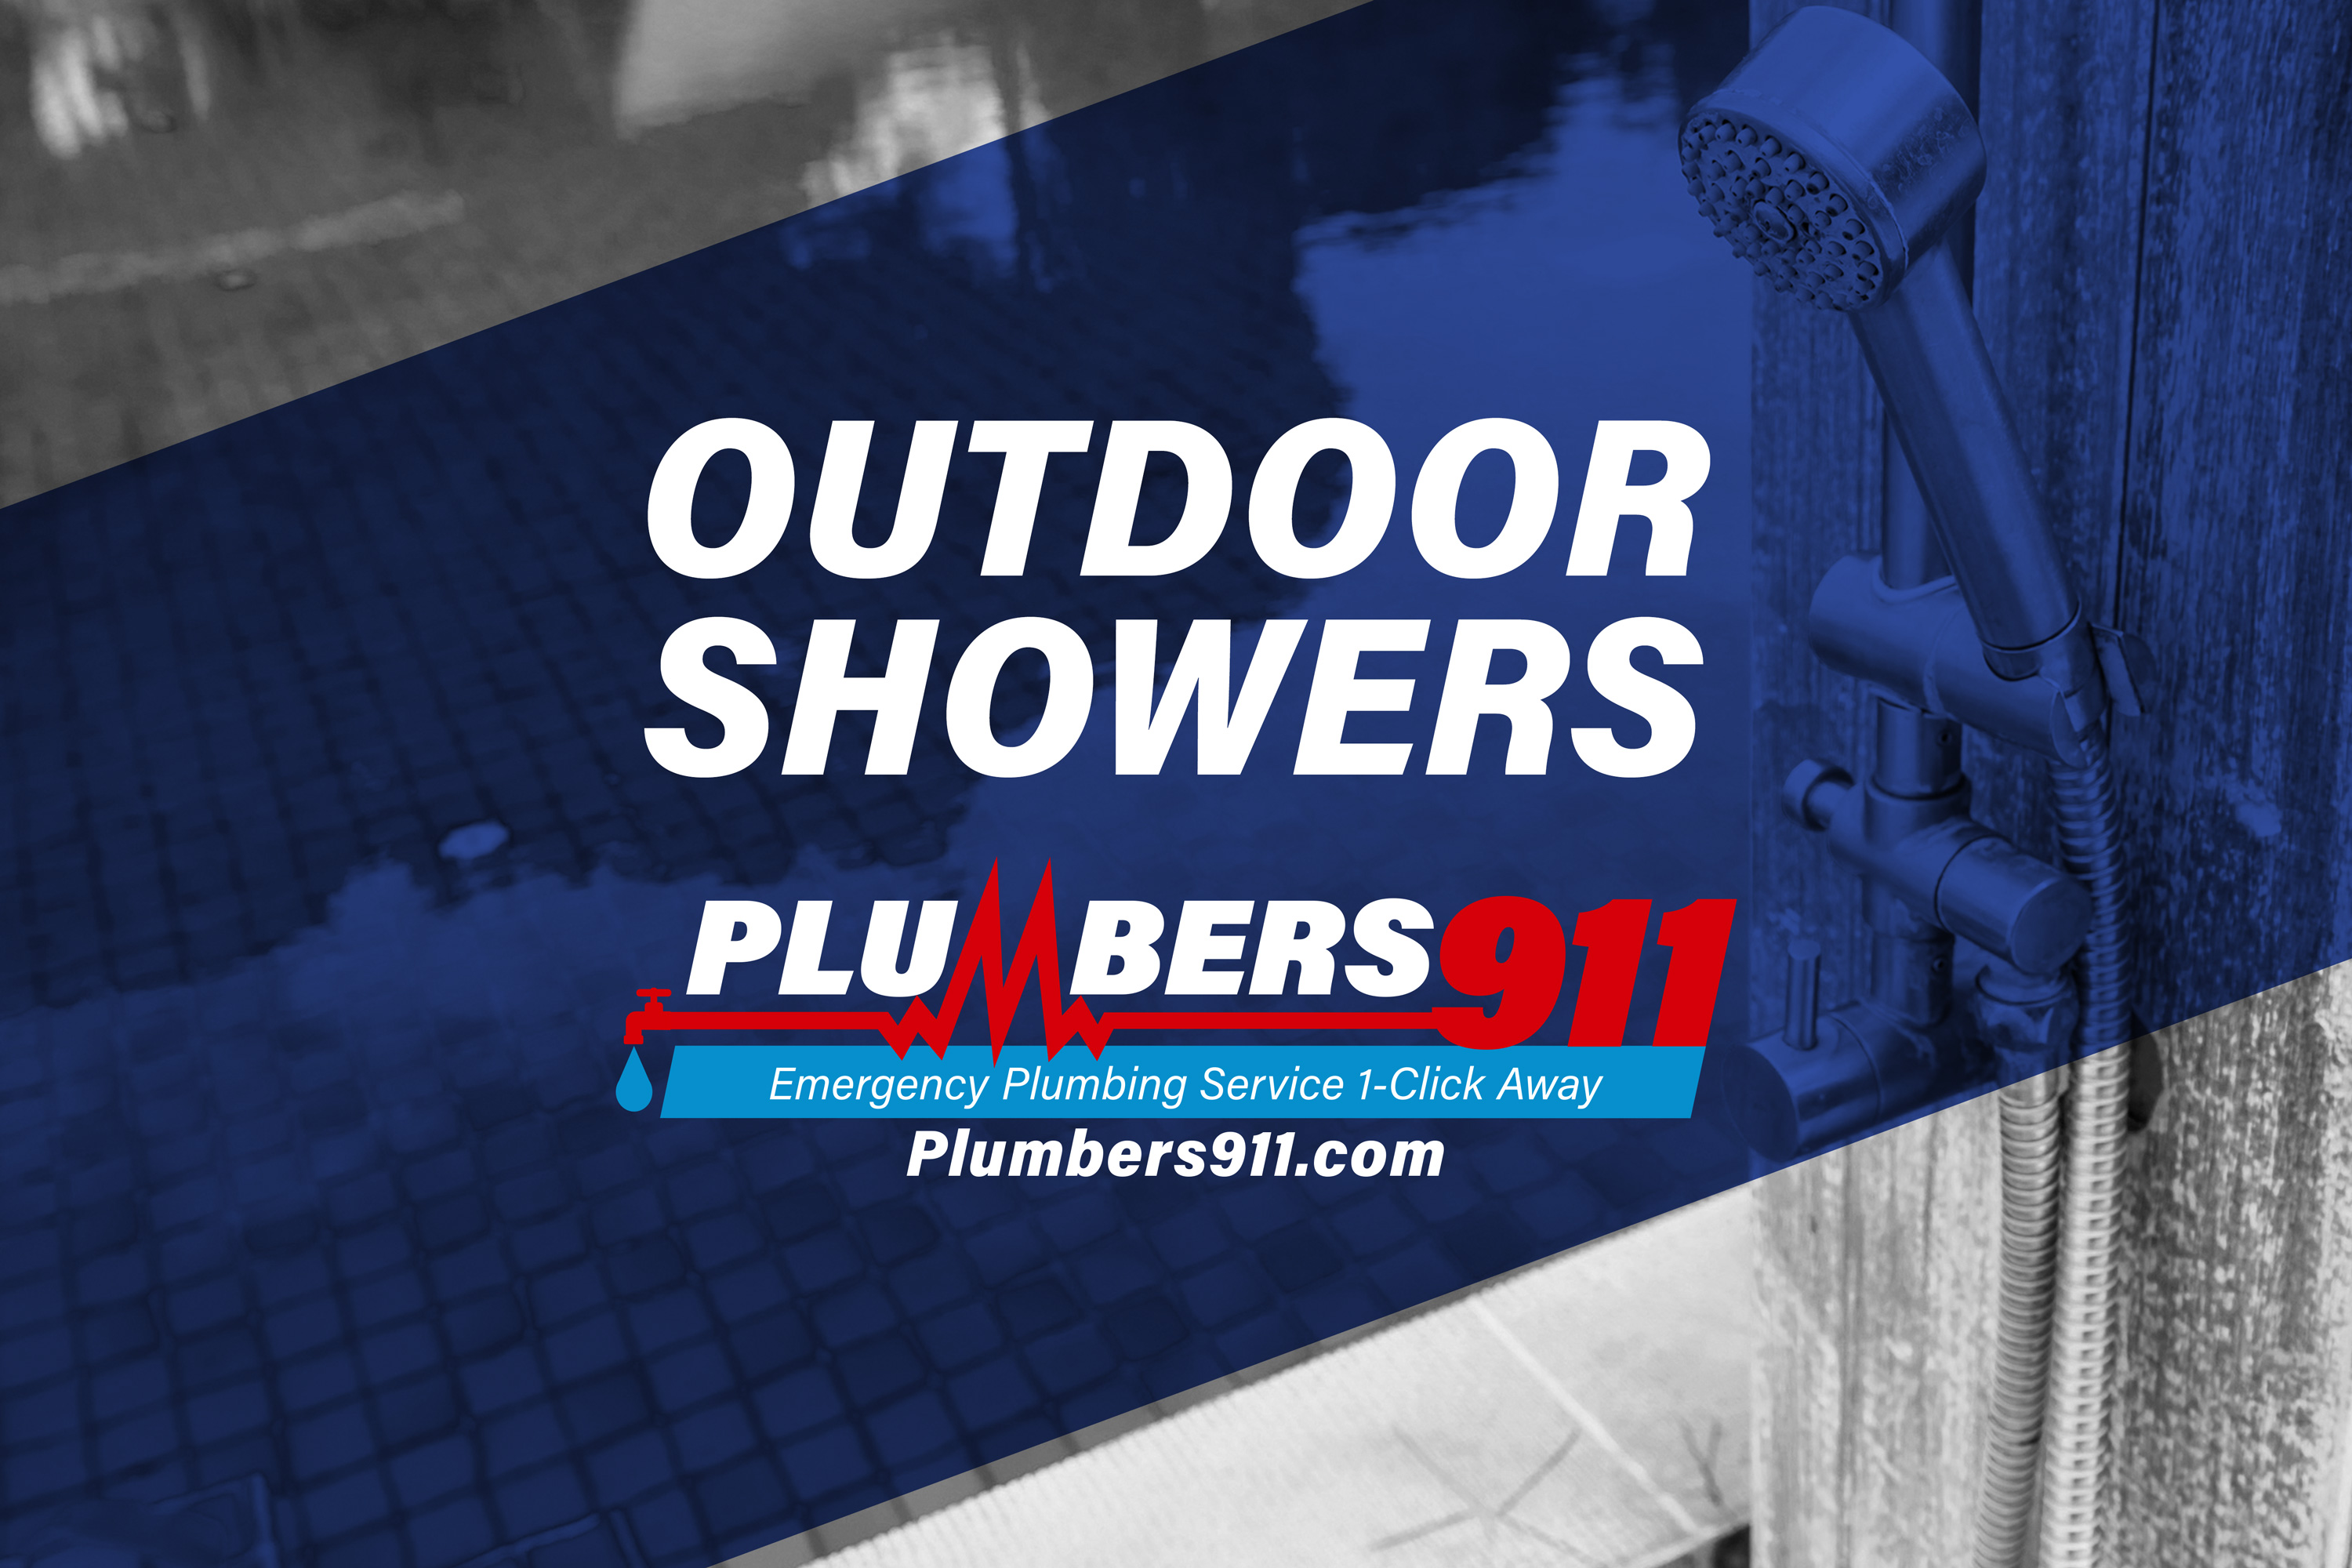 Plumbers 911 - Additional Plumbing Services - Outdoor Showers